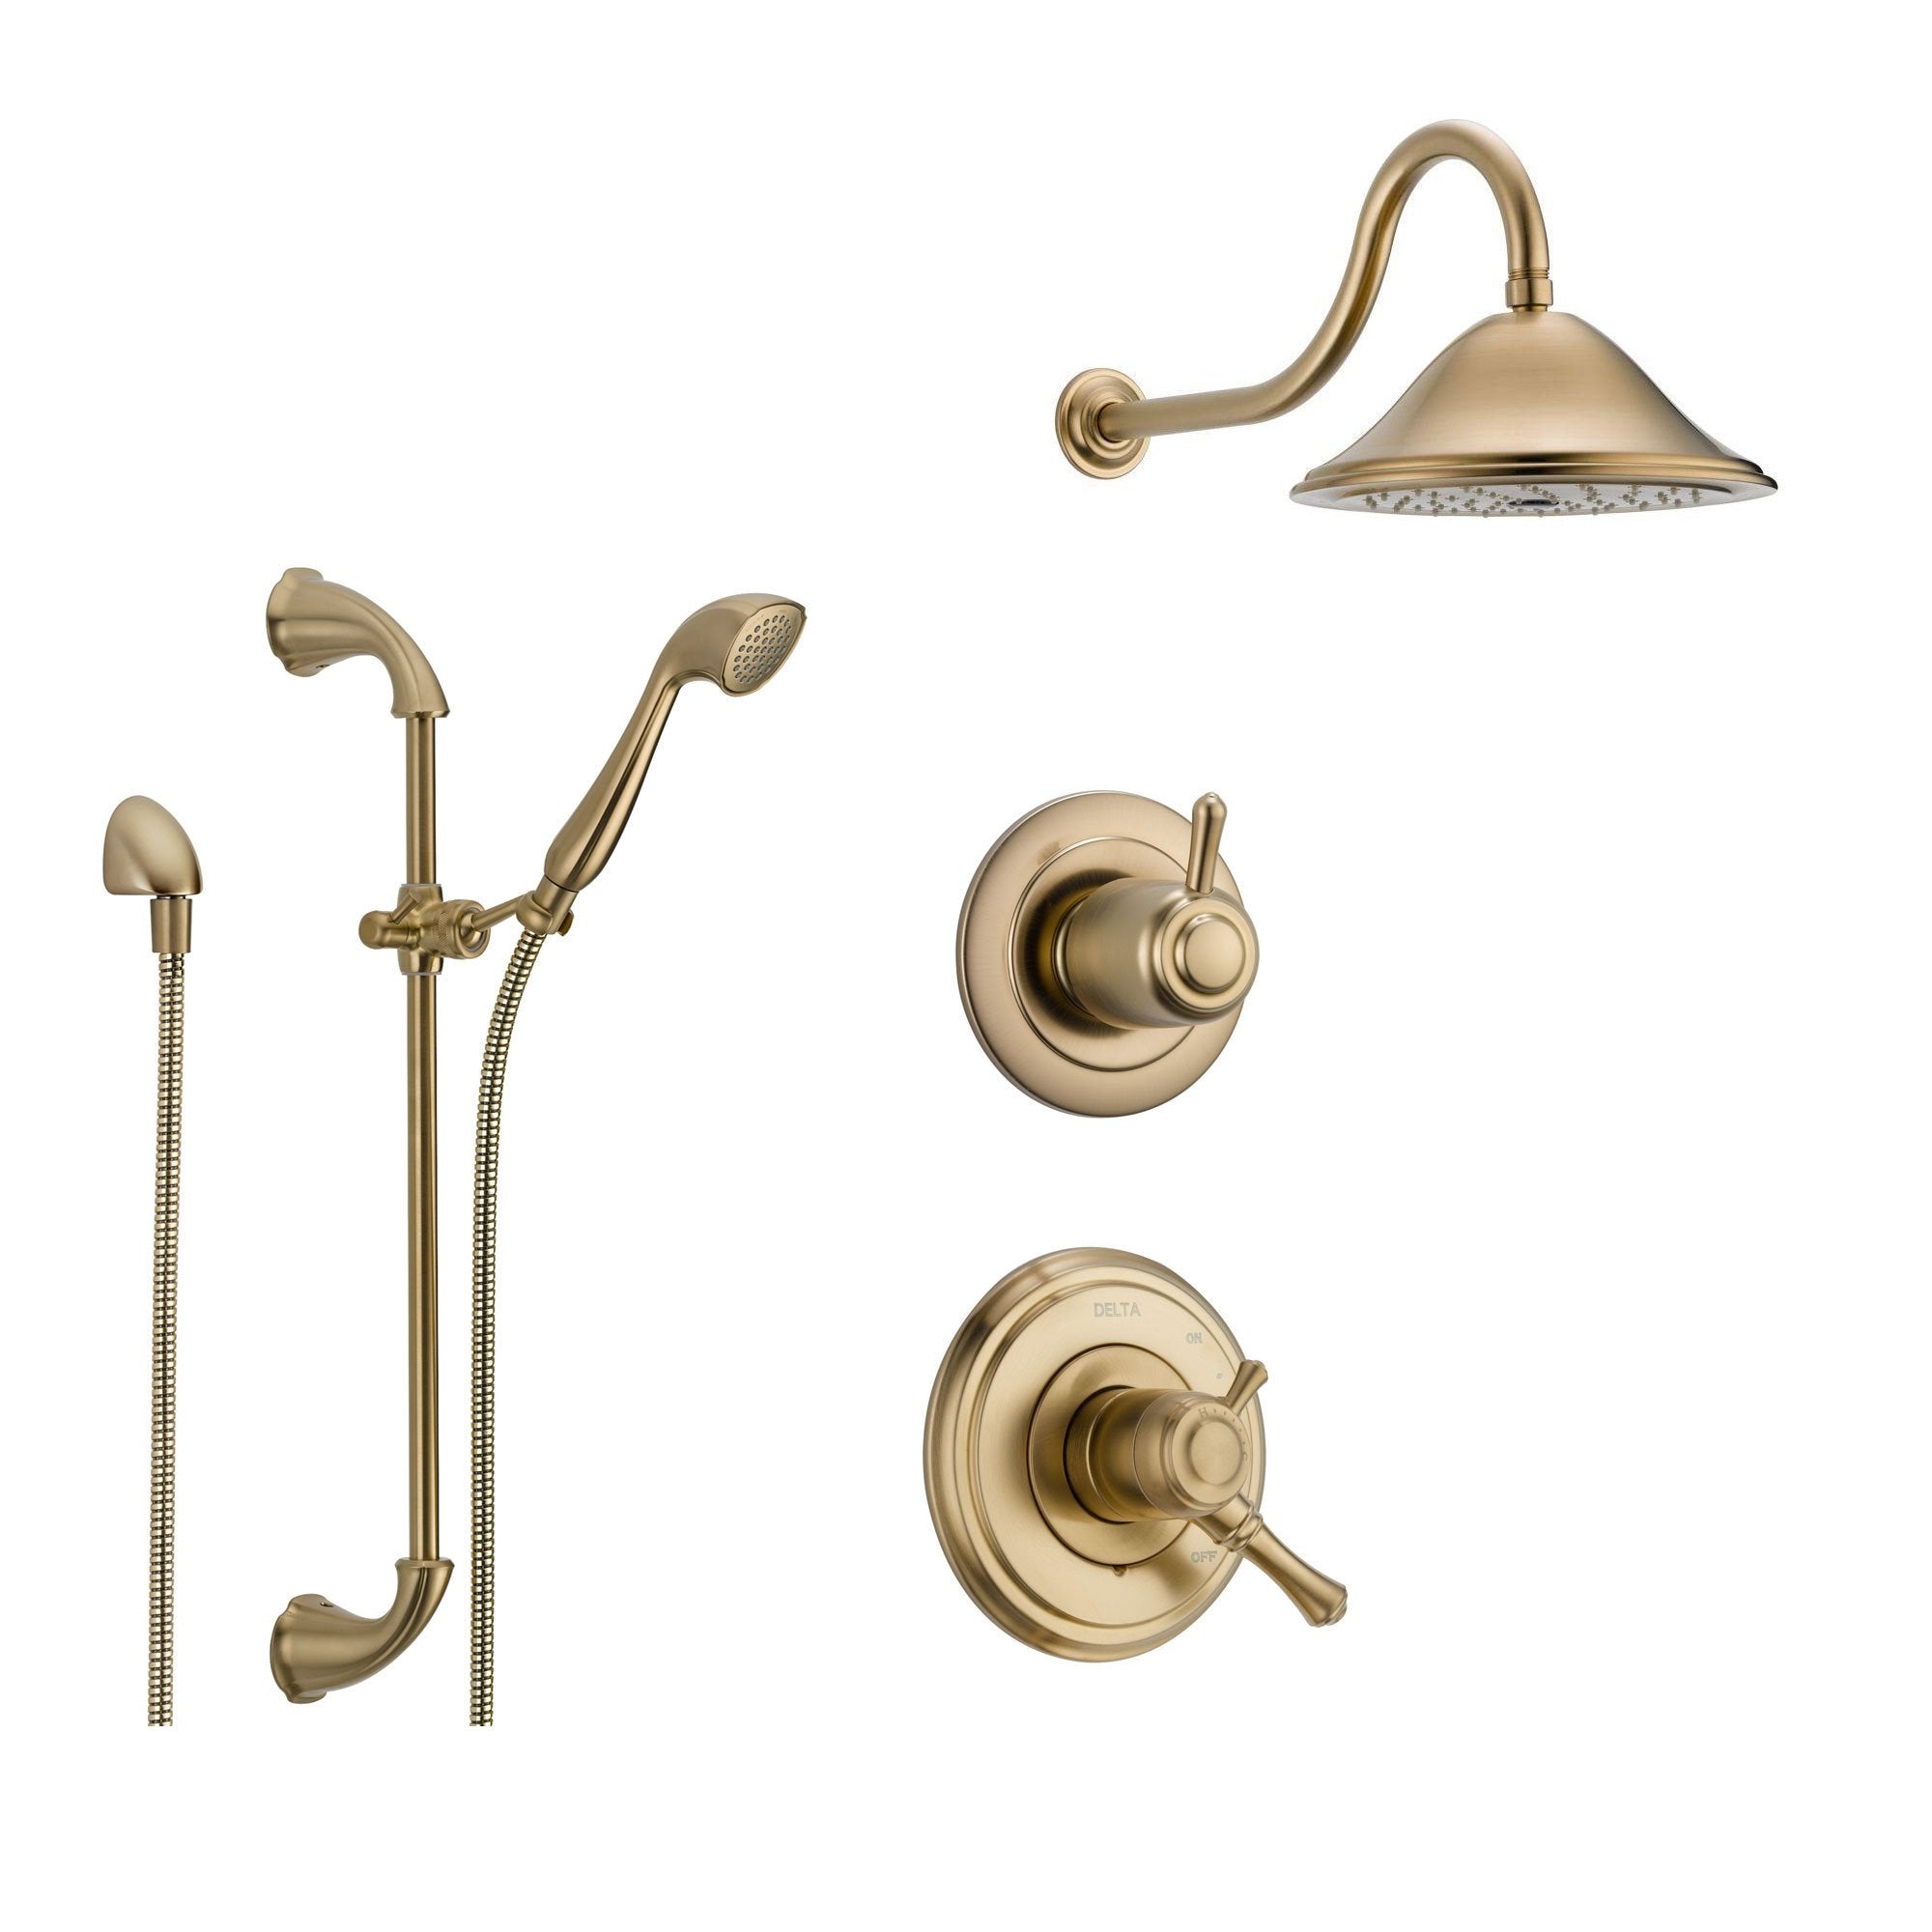 Delta Cassidy Champagne Bronze Shower System with Dual Control Shower Handle, 3-setting Diverter, Large Rain Showerhead, and Handheld Shower SS179782CZ